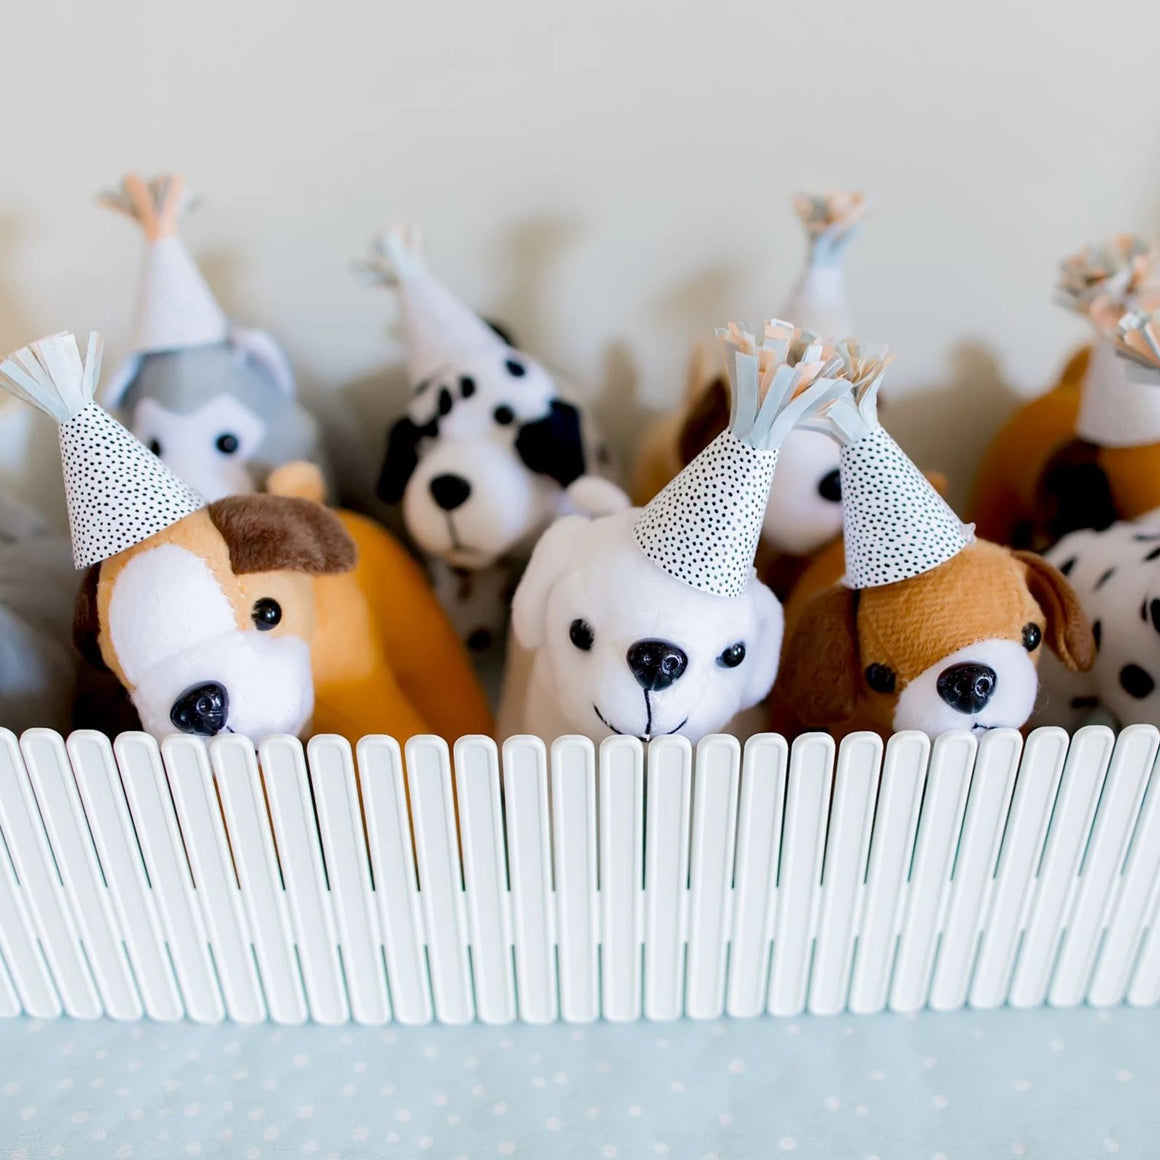 Small stuffed animal dogs wearing party animal hats in a plastic white fence.